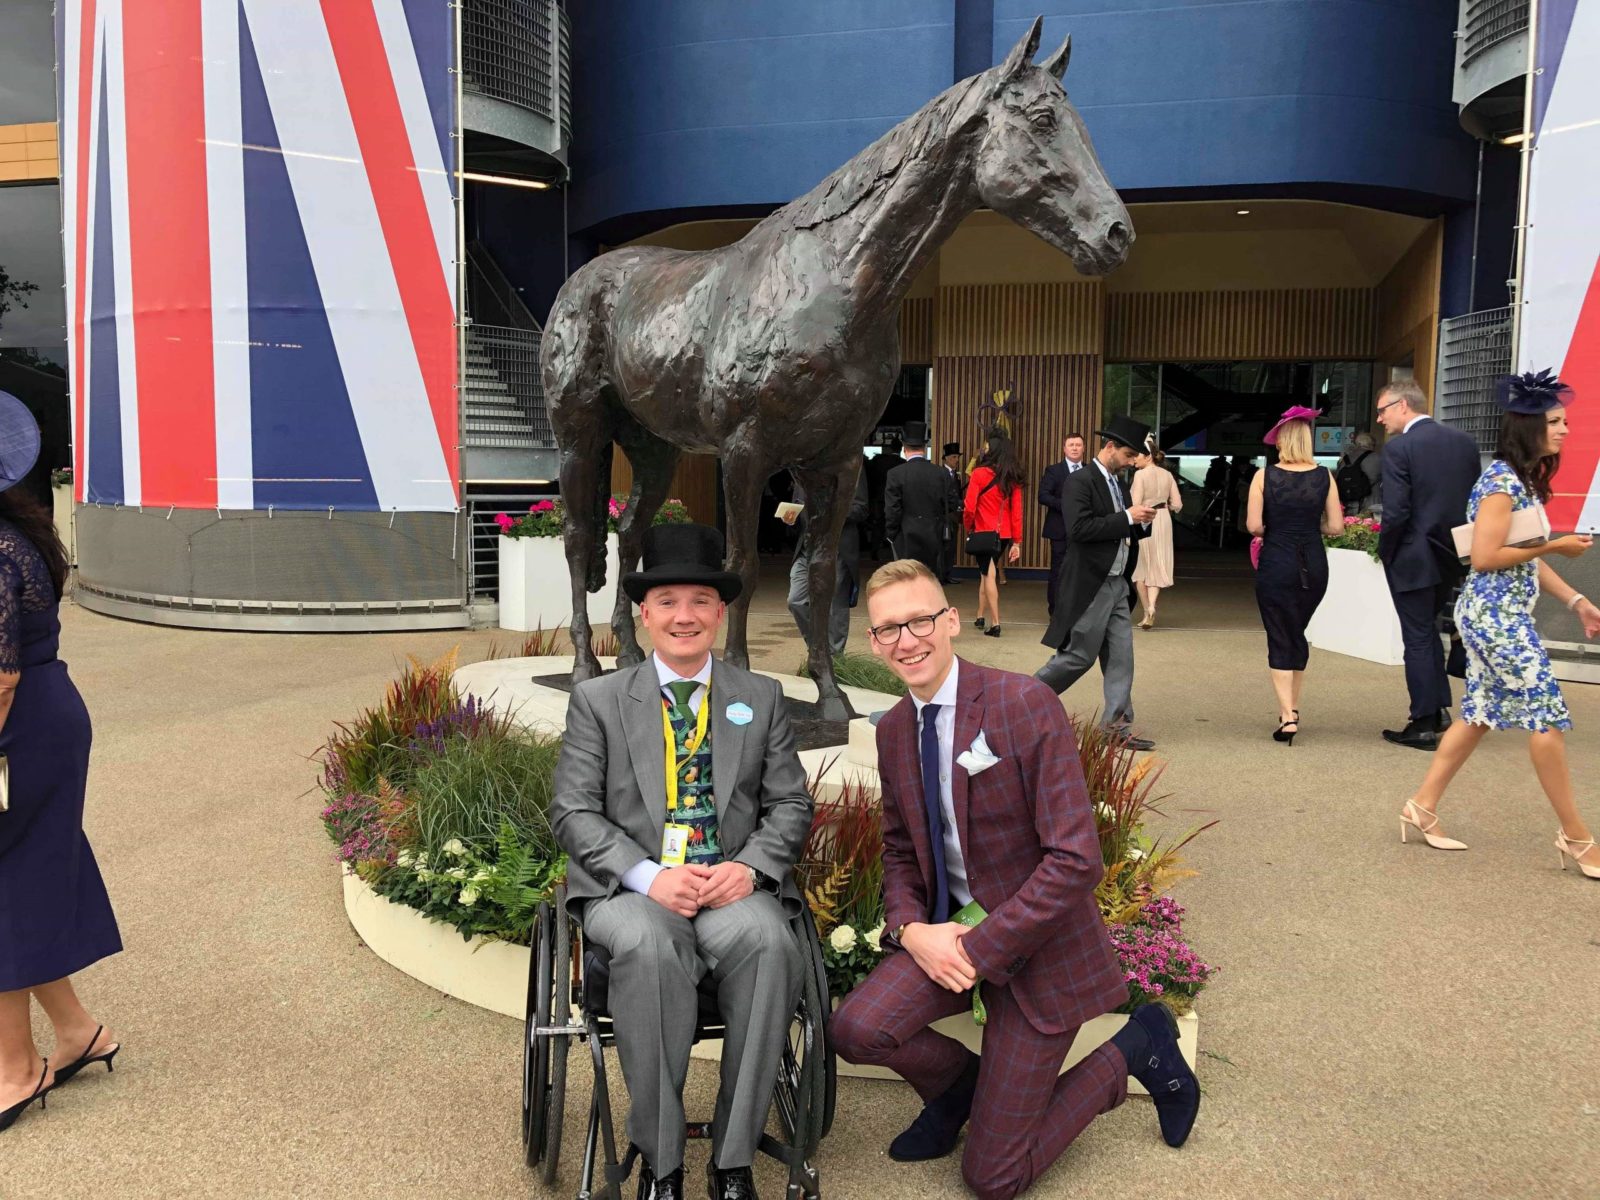 Freddy Tylicki, Trotter & Deane brand ambassador wearing suit at Royal Ascot